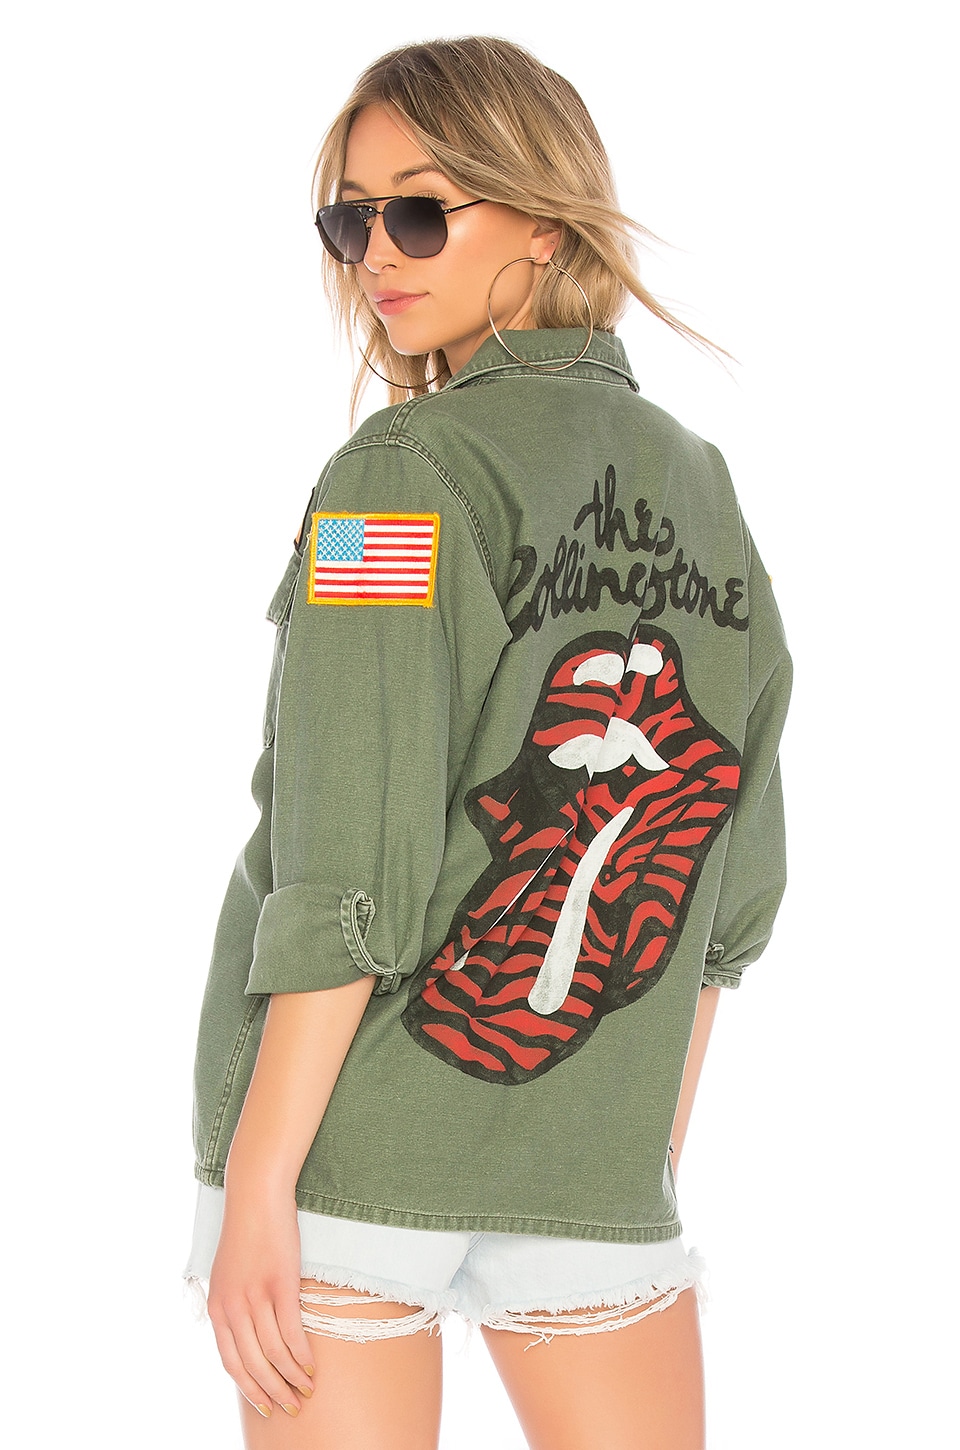 The Rolling Stones Army Jacket